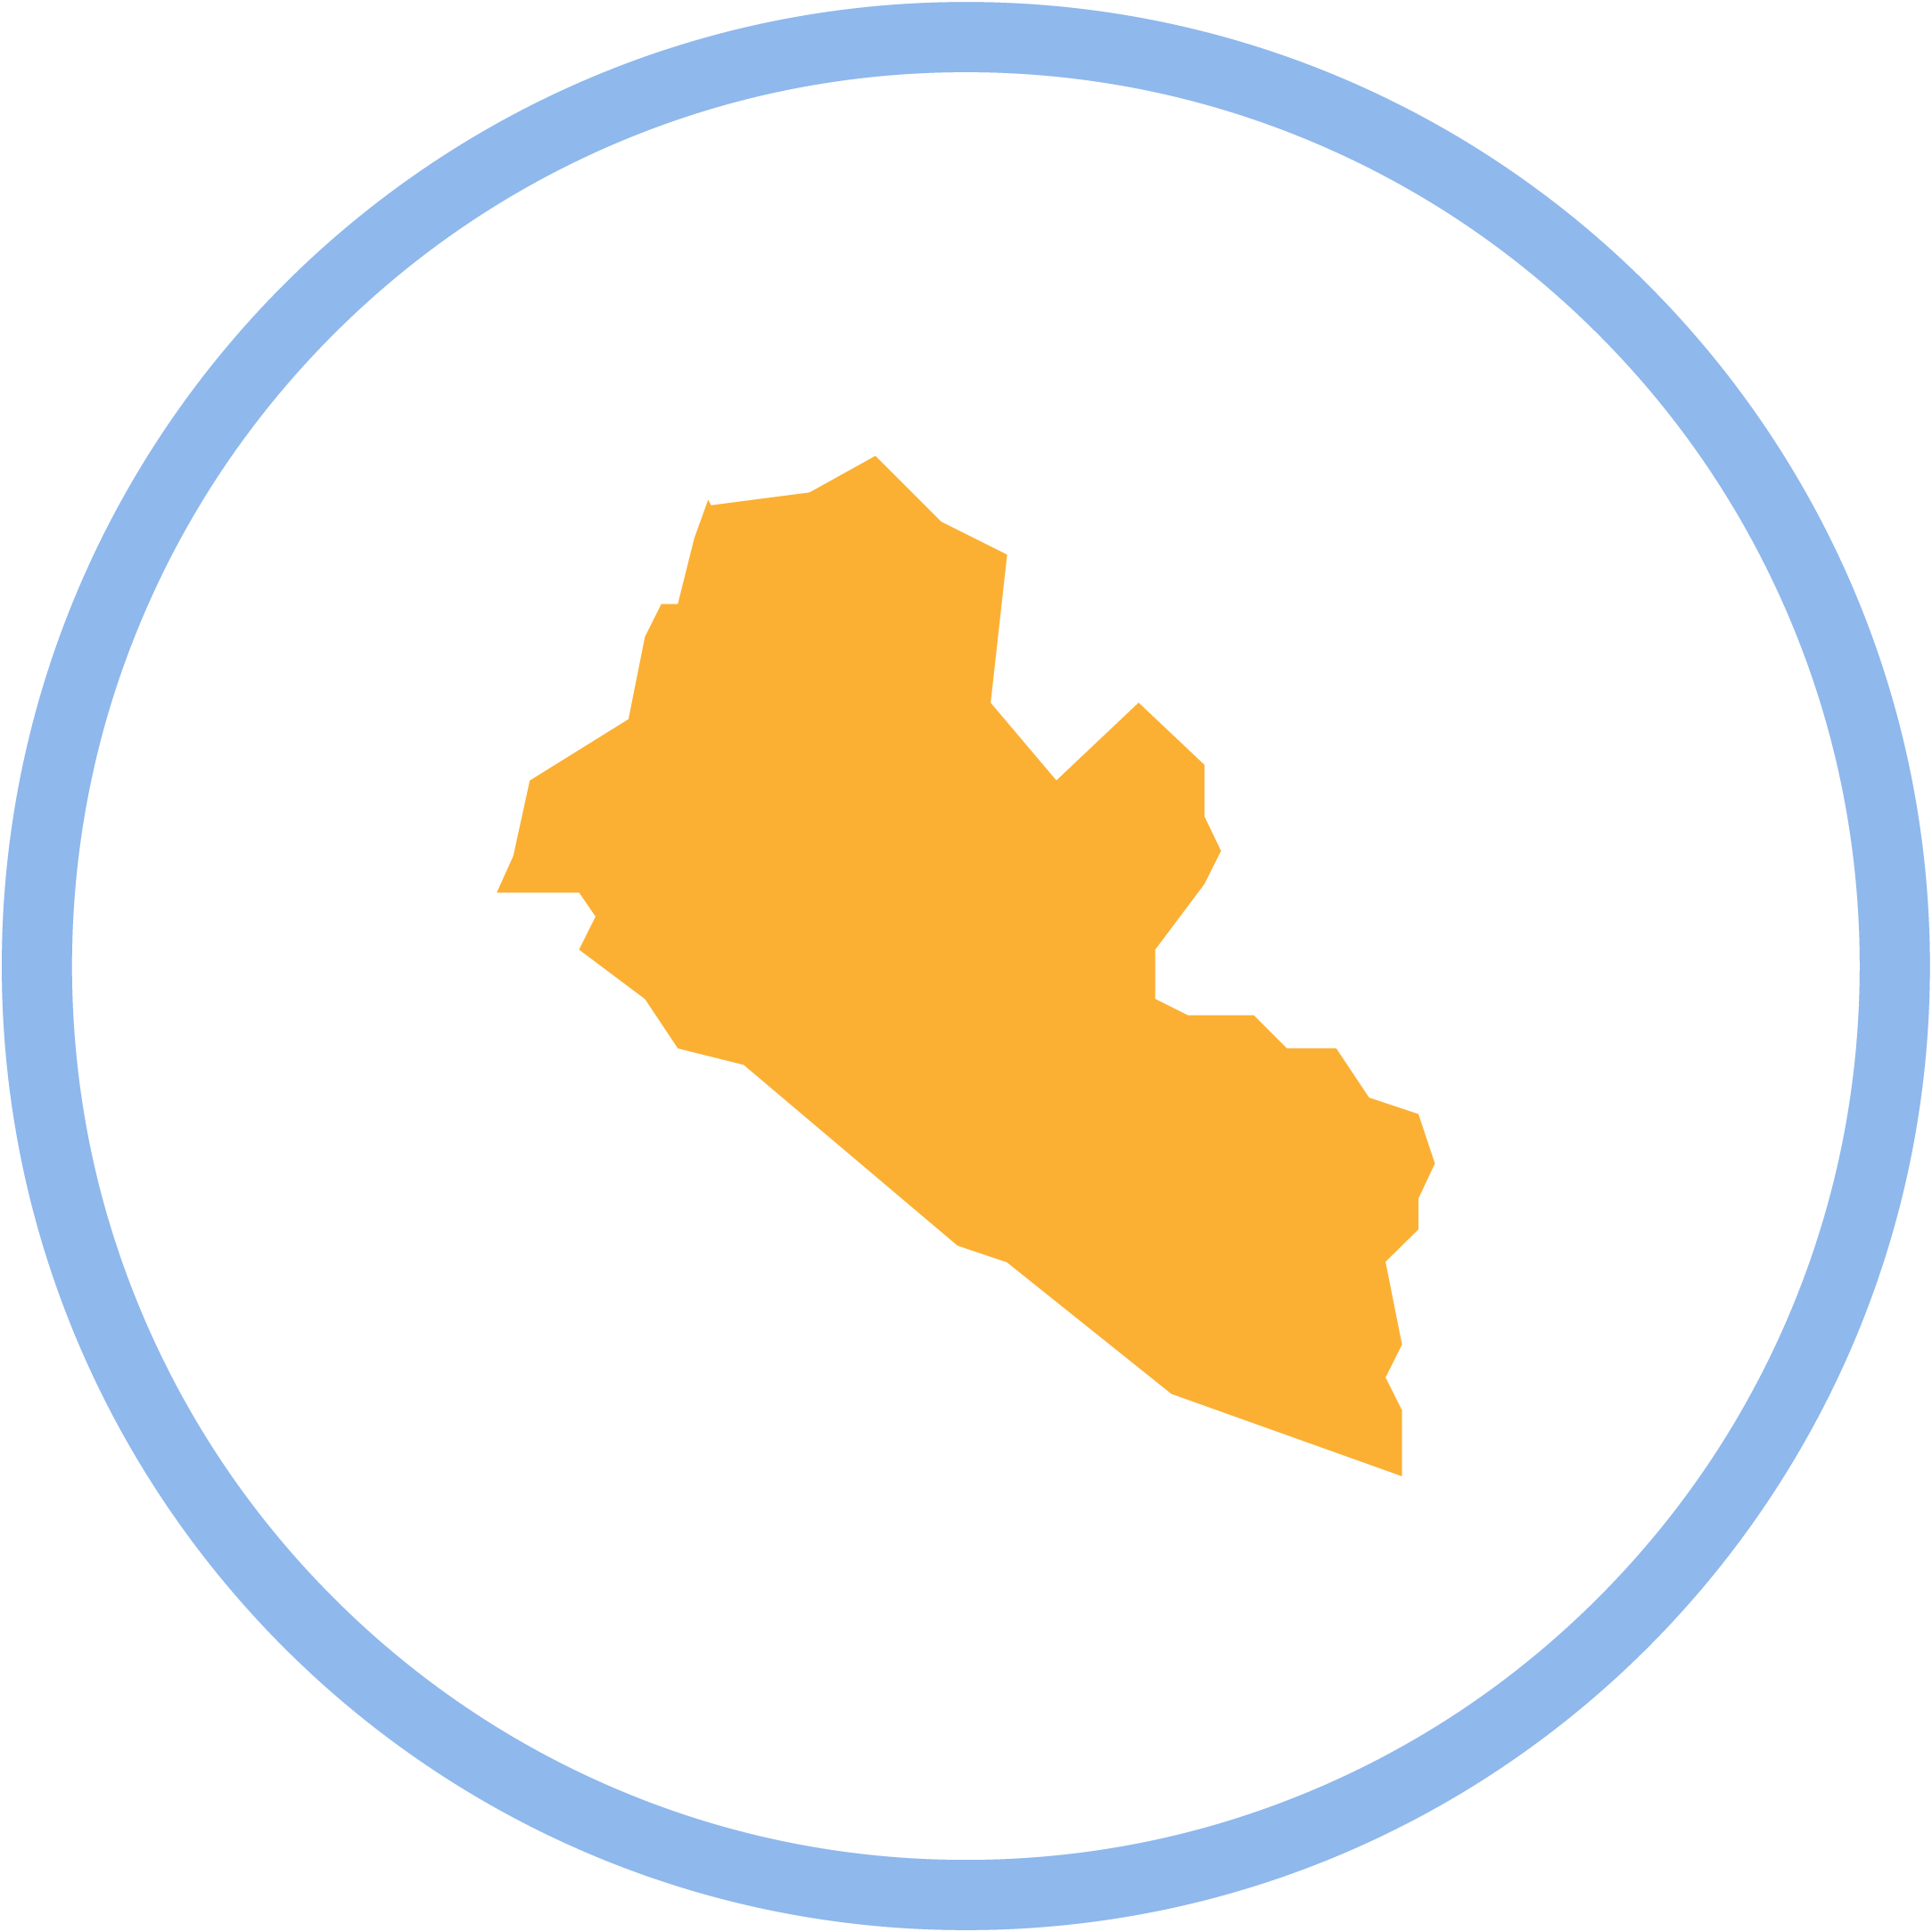 icon containing outline of the country of Liberia